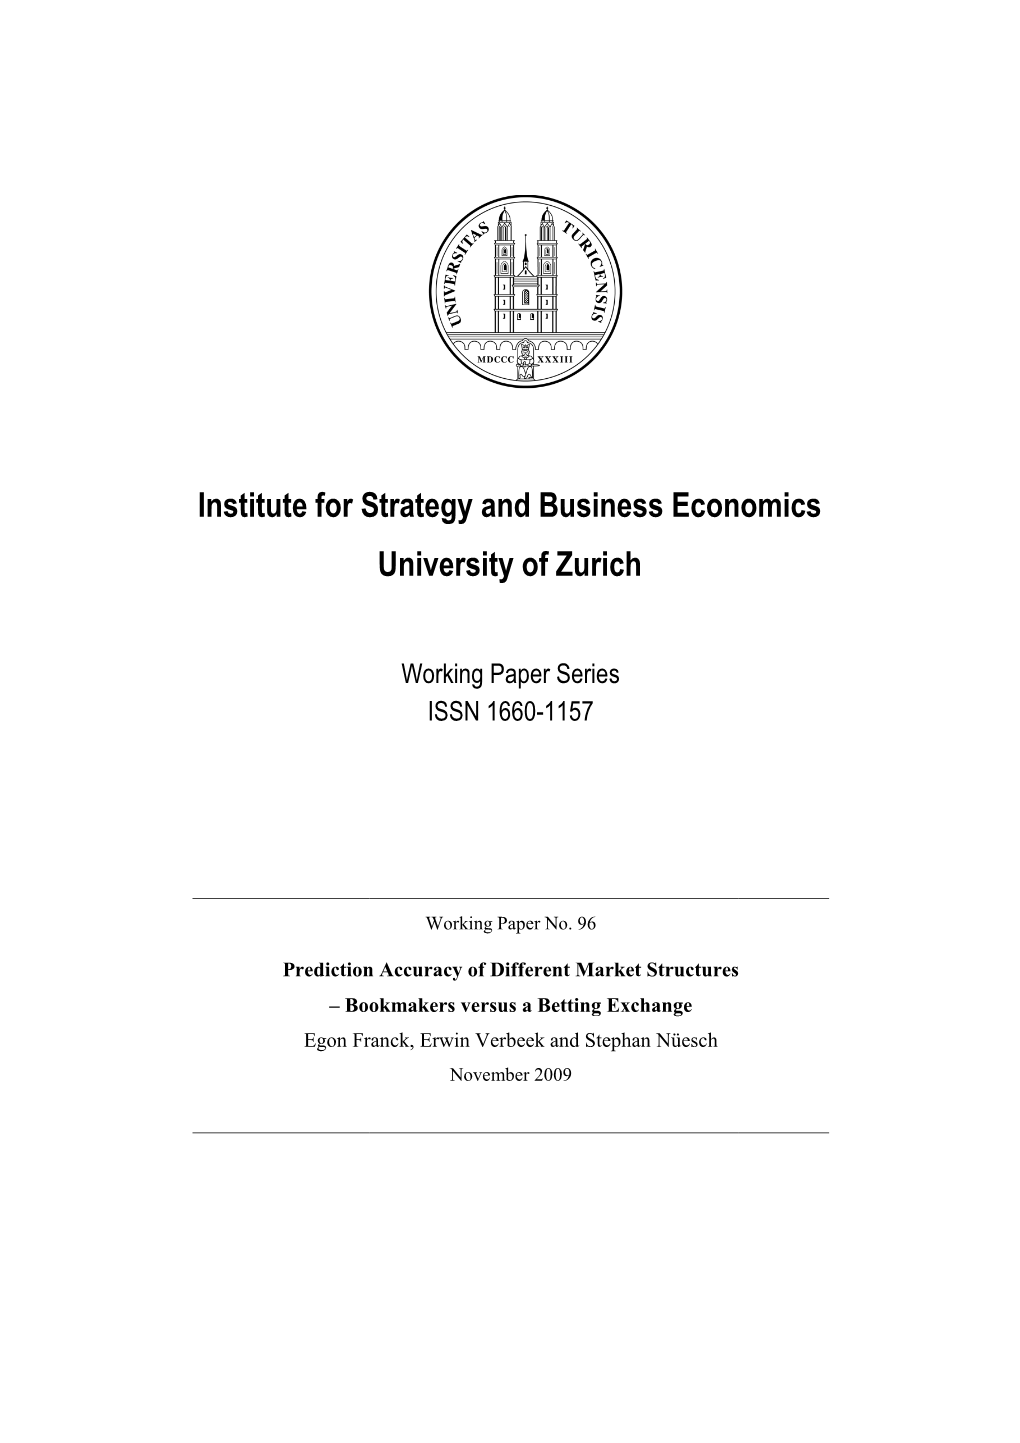 Institute for Strategy and Business Economics University of Zurich